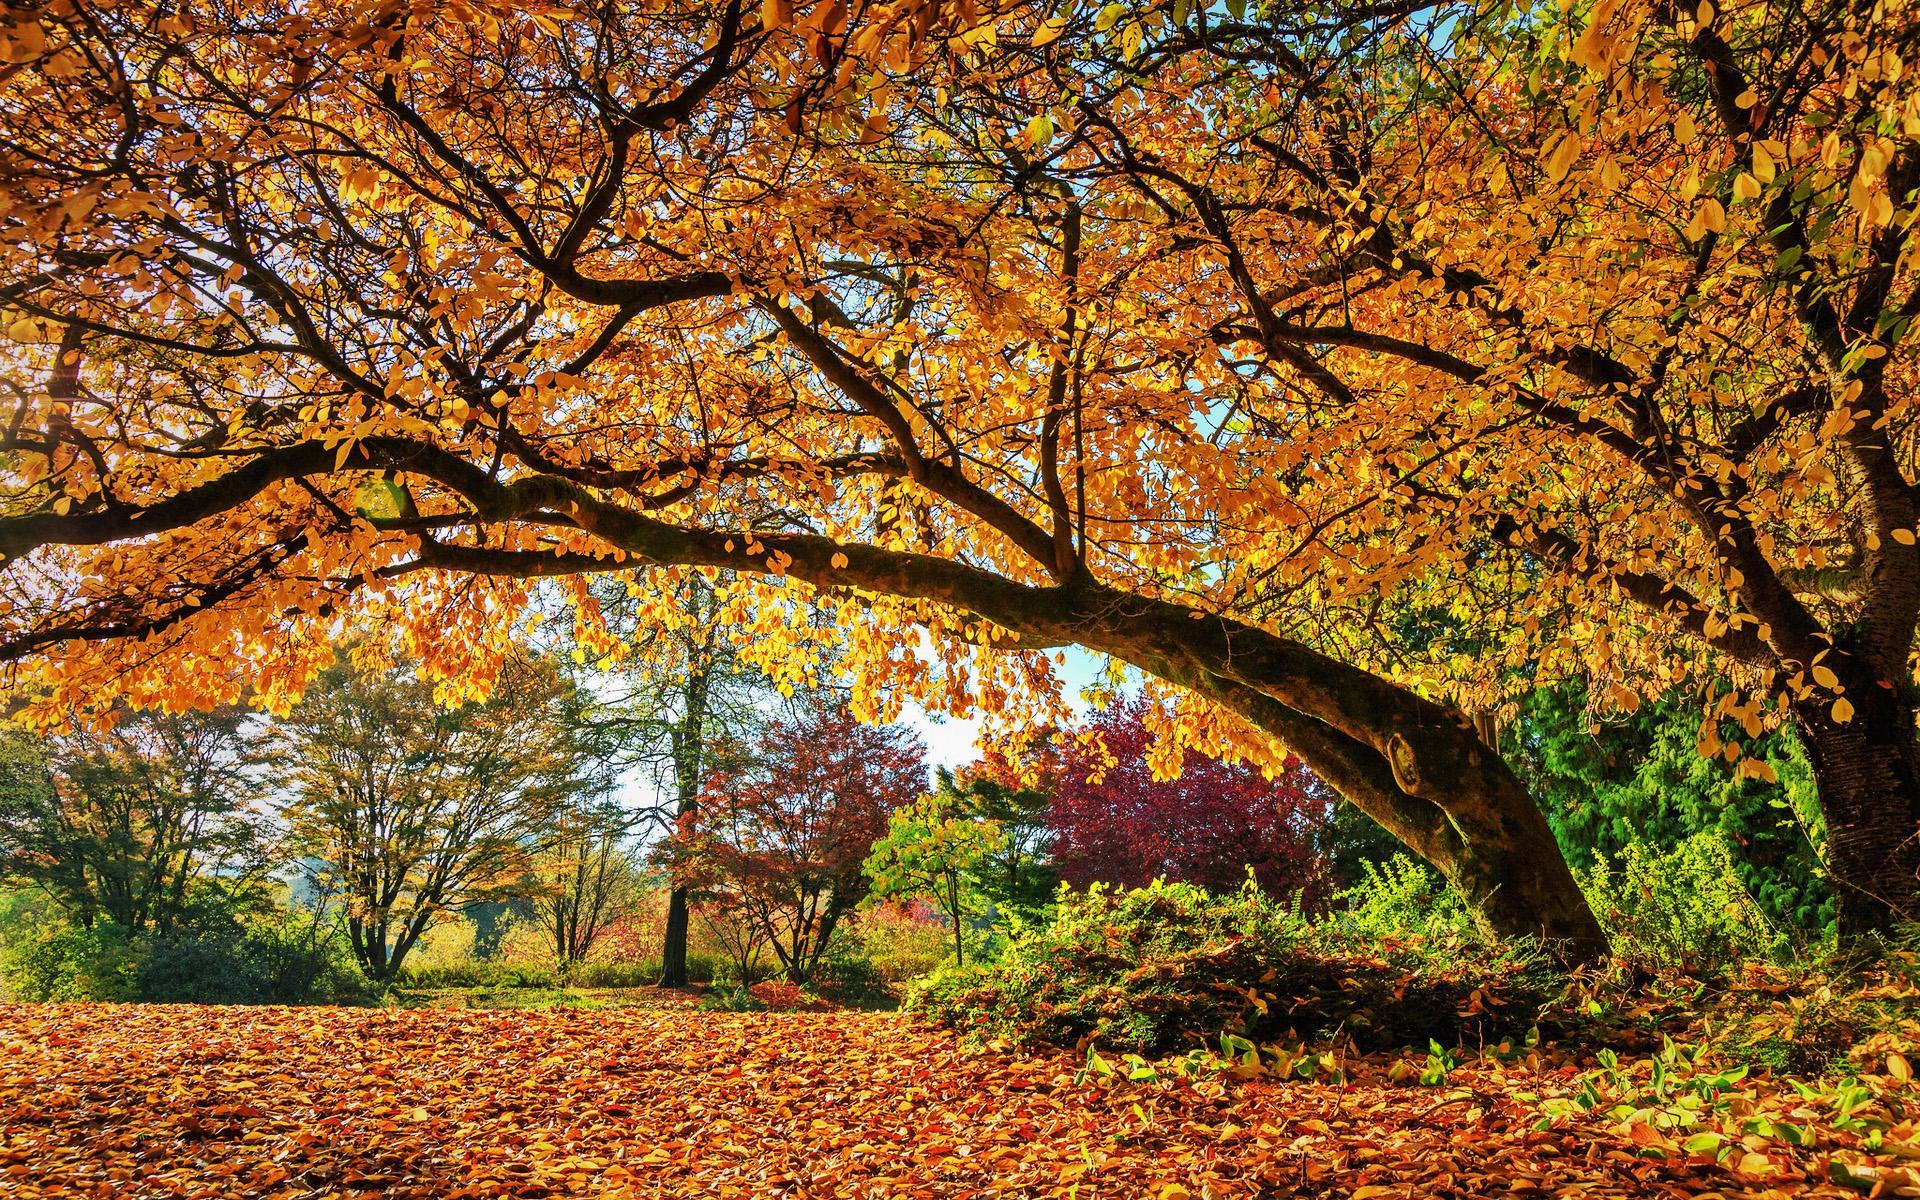 Download wallpaper autumn, HDR, park, forest, yellow trees